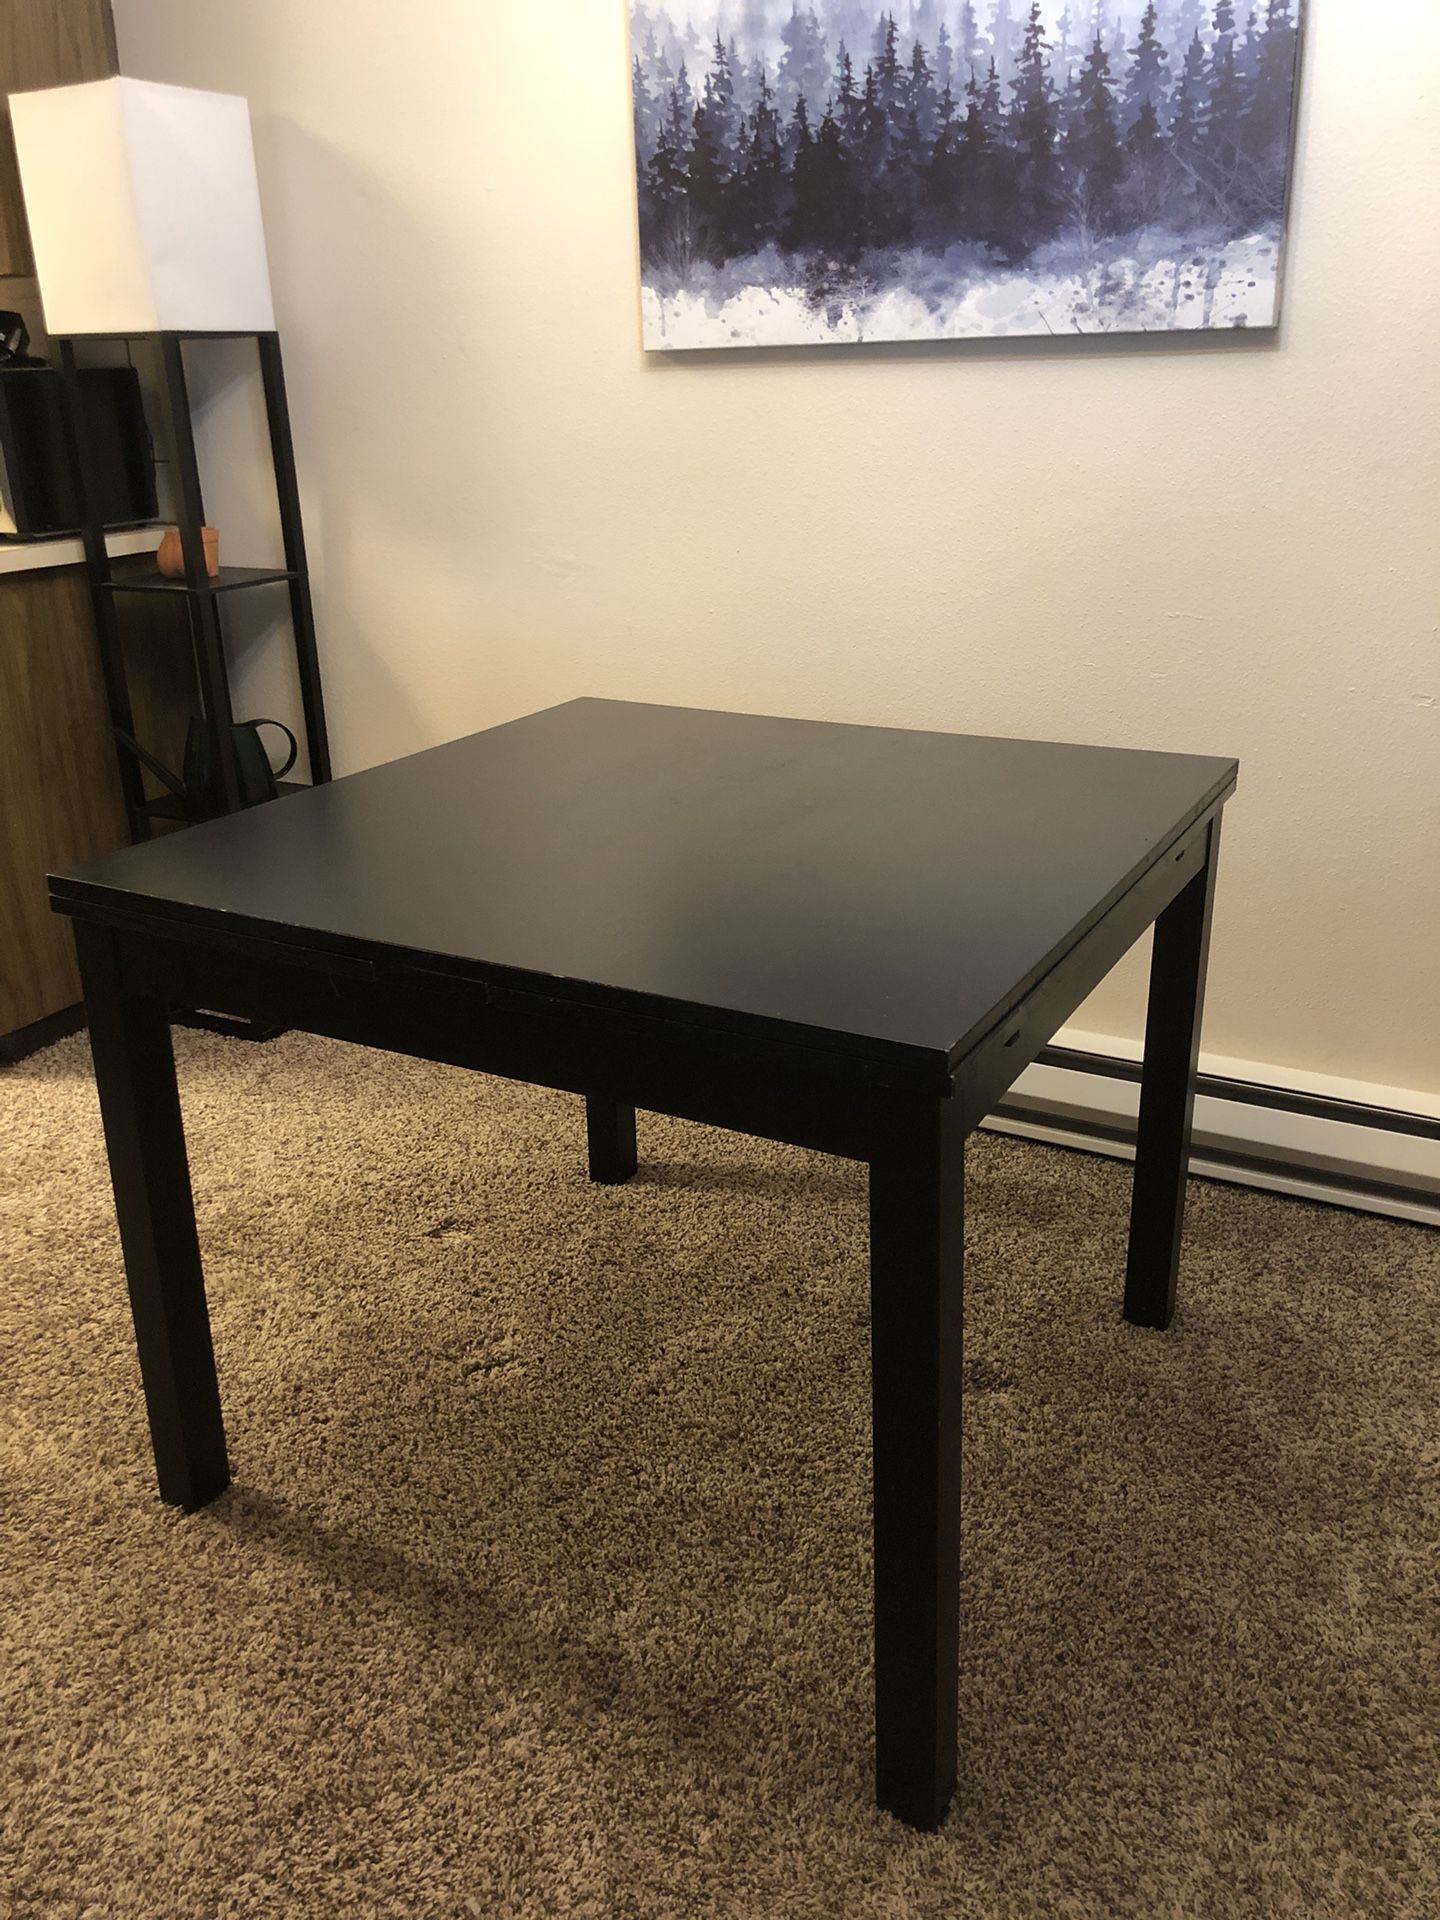 IKEA Expandable Dining Table